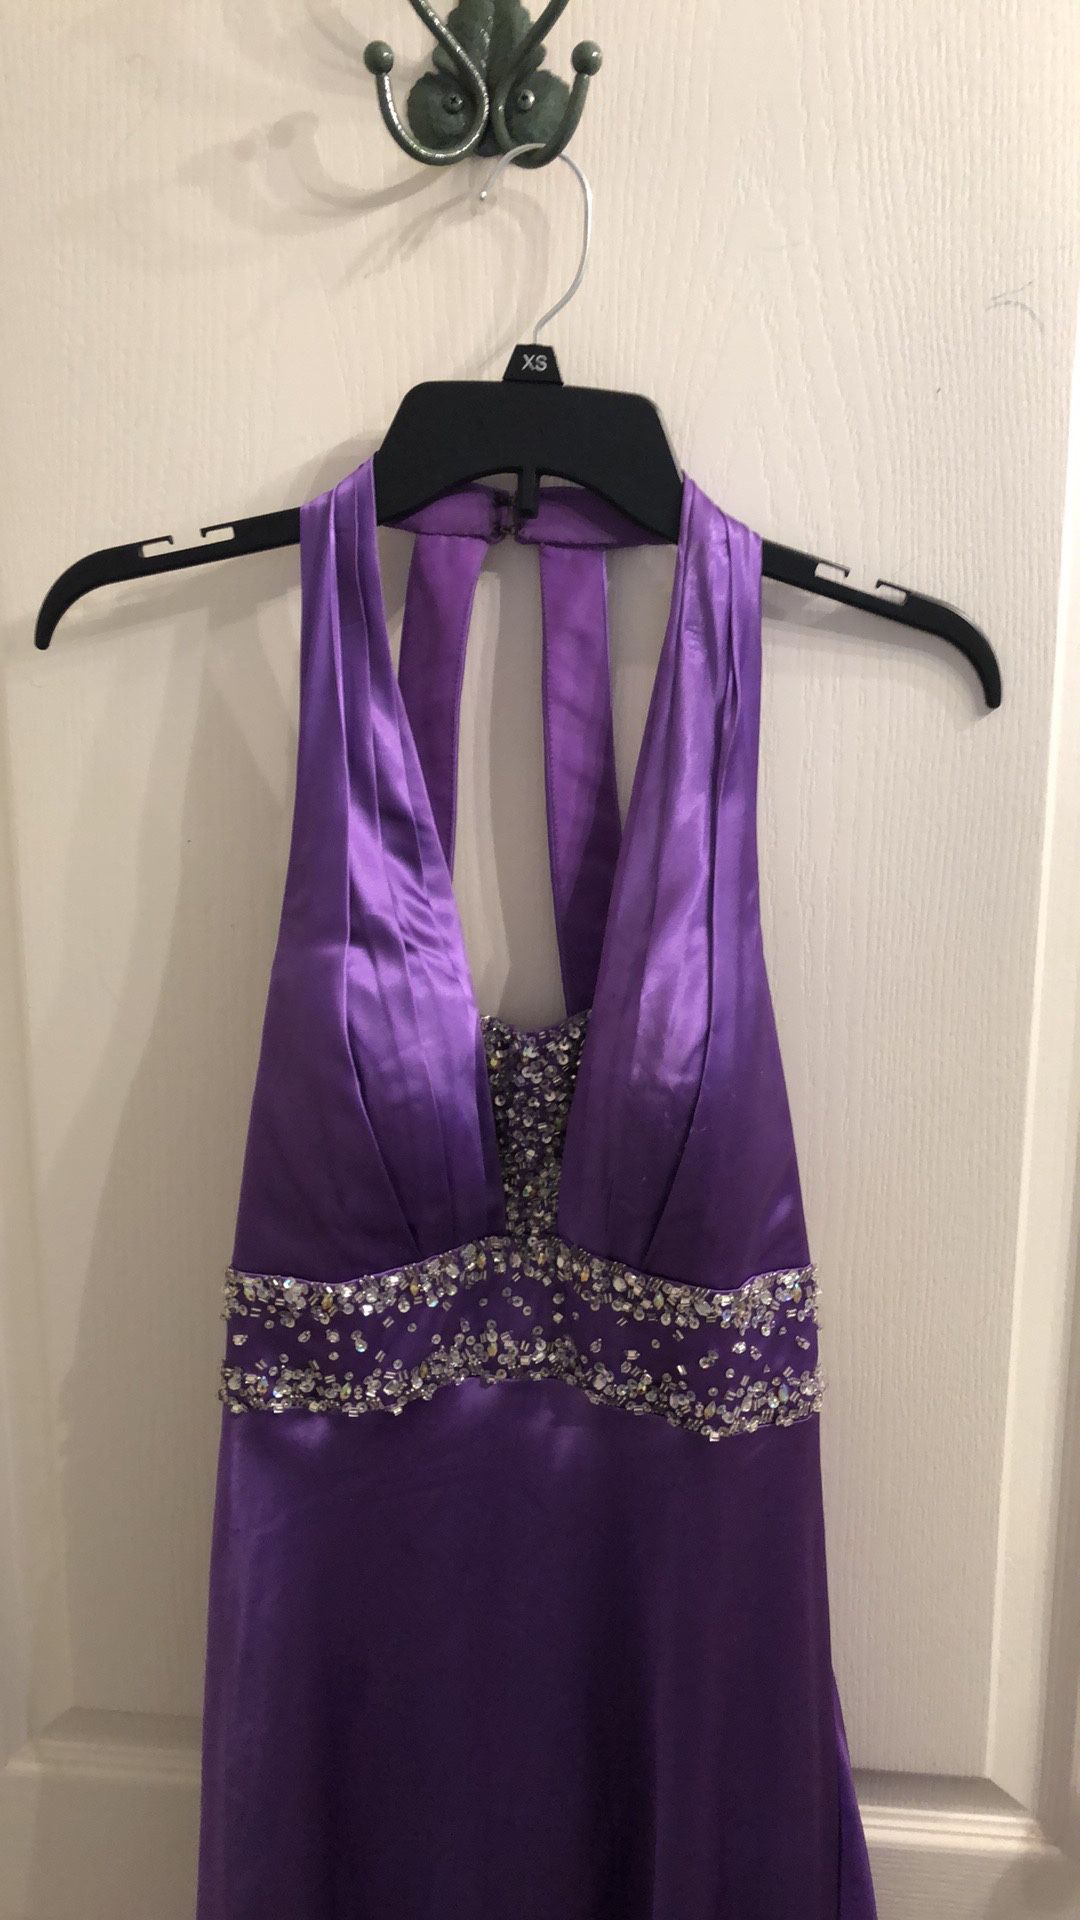 Bright Purple Prom Dress/Gown (Size 11)